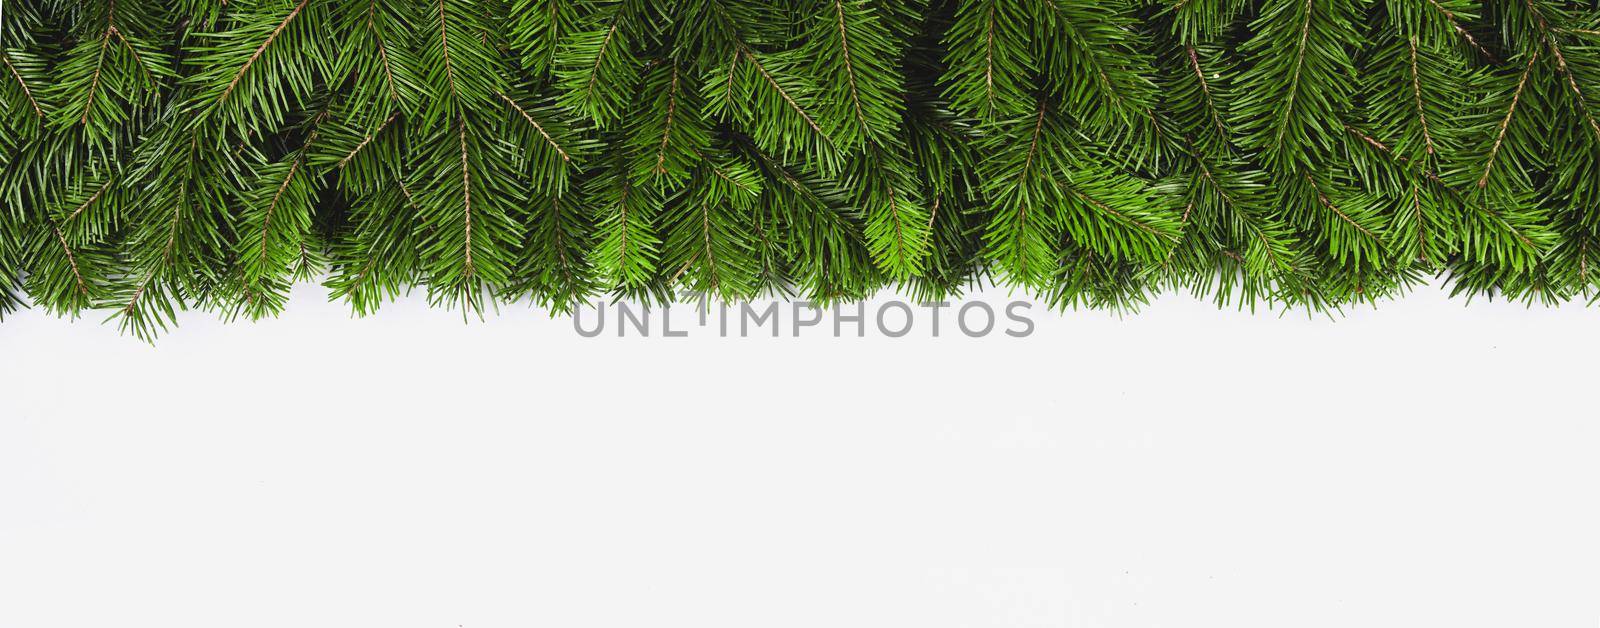 Christmas green frame of spruce tree isolated on white background